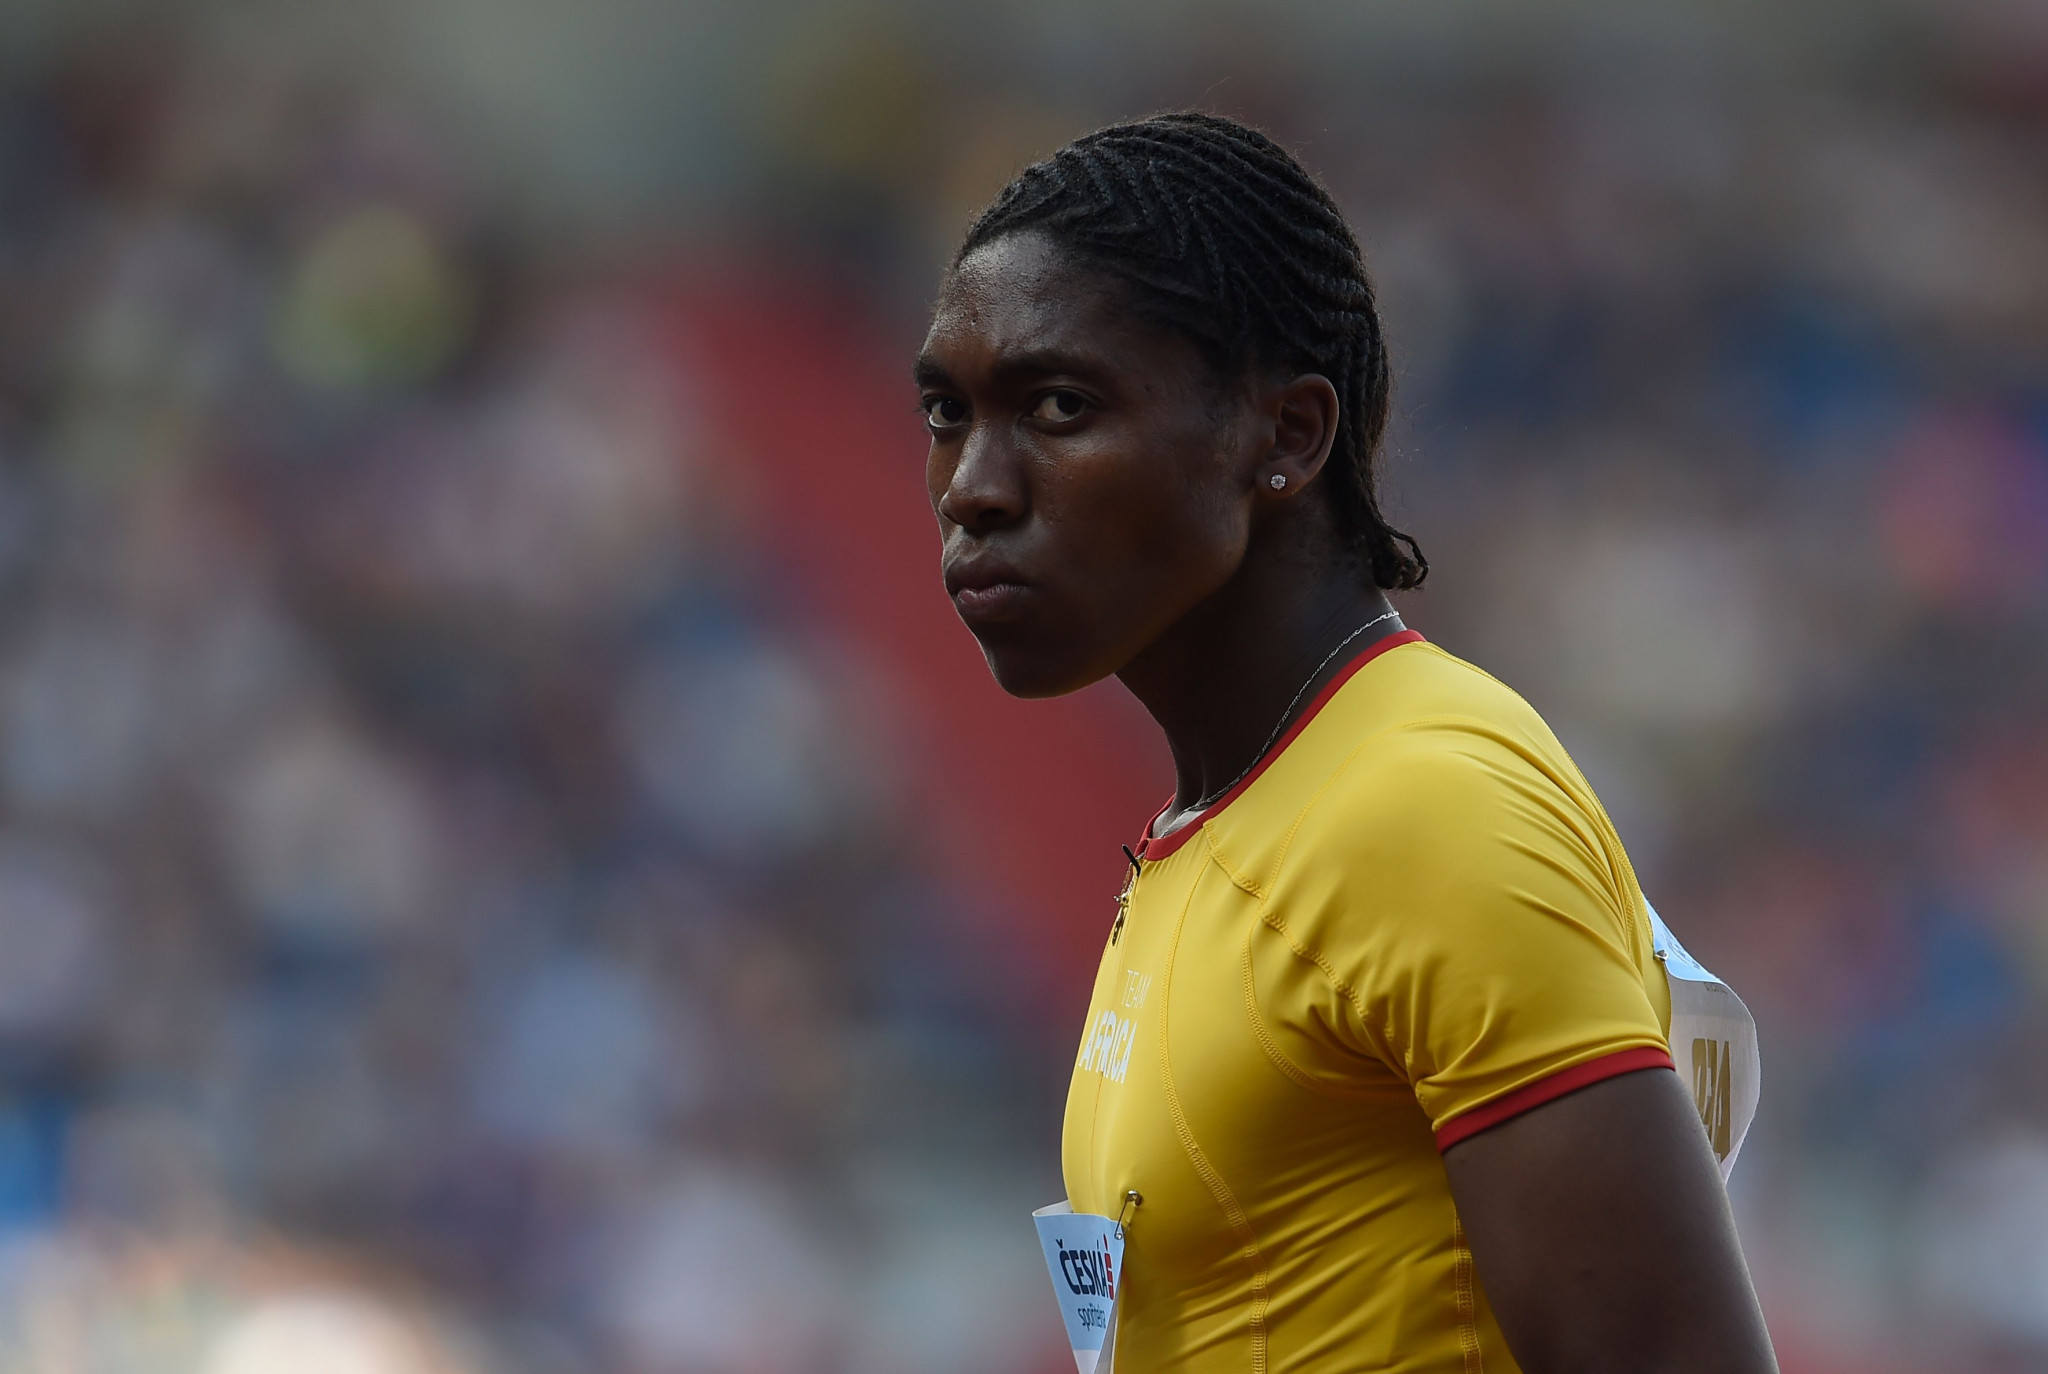 Rules on testosterone have been stayed amid Caster Semenya's challenge ©Getty Images